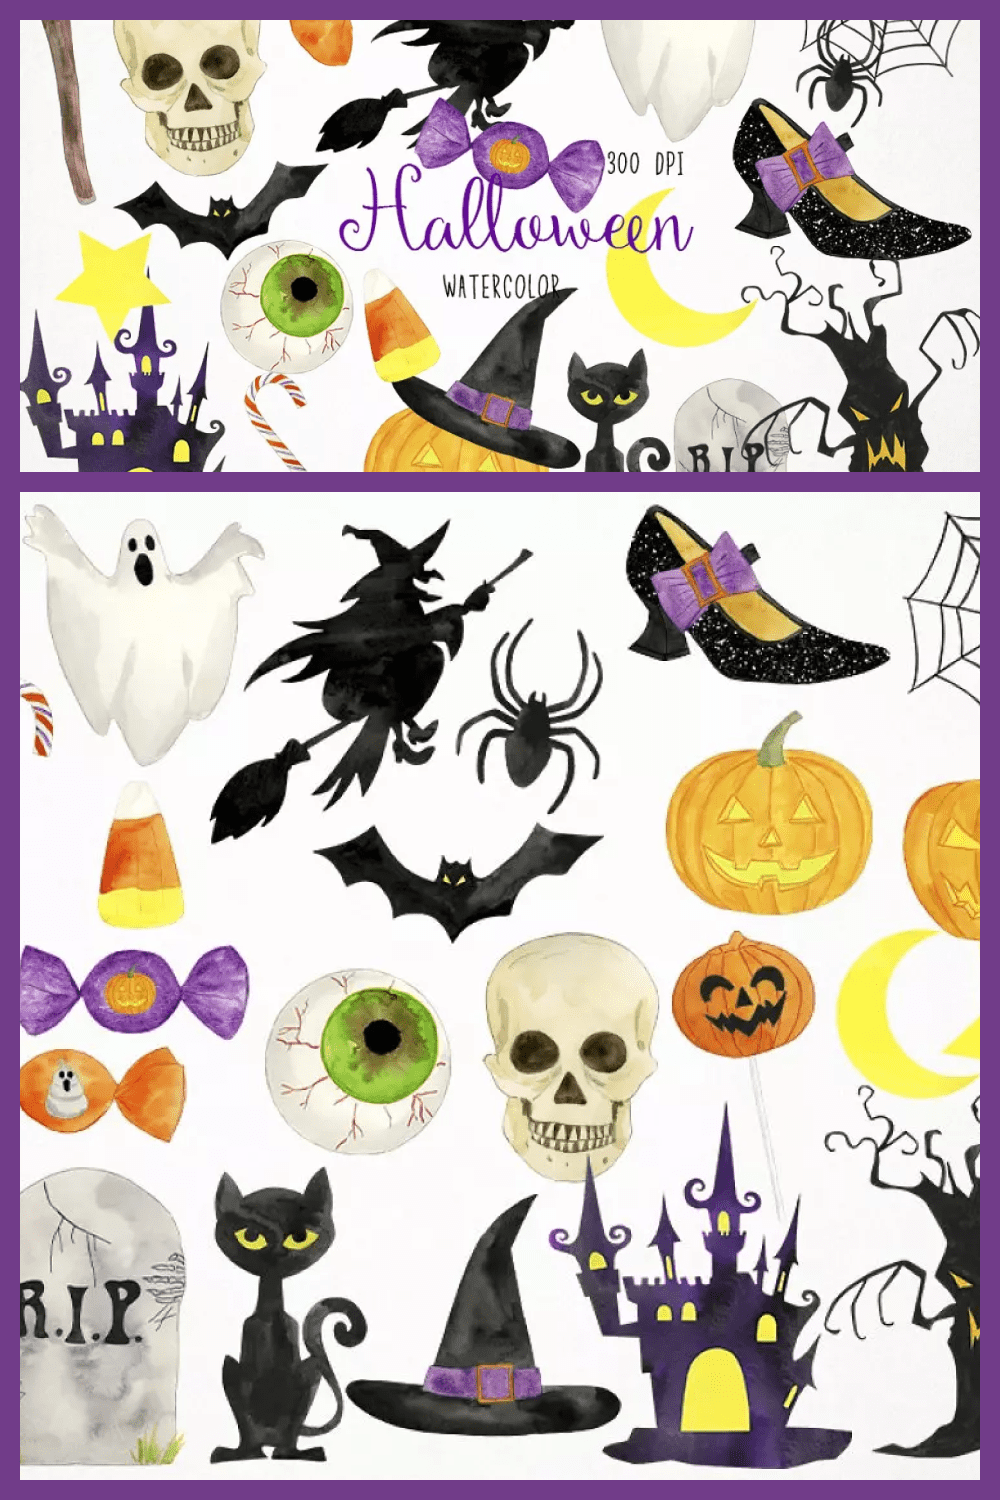 Painted ghosts, witches on a broomstick, spiders, bats, cats, skulls, pumpkins.